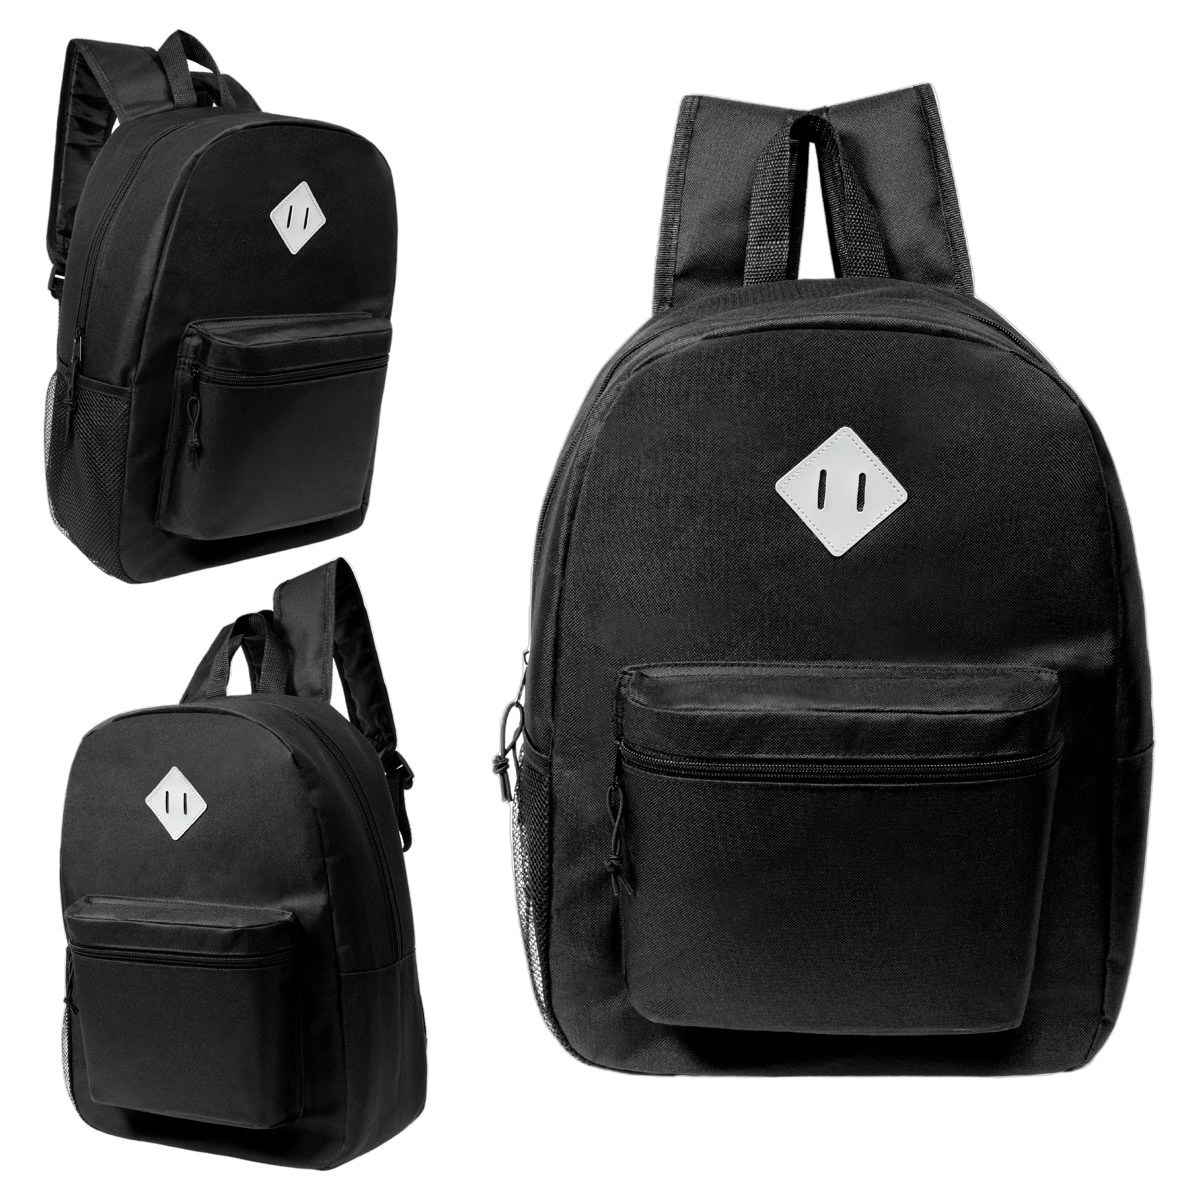 ''17'''' Lightweight Classic Style BACKPACKs w/ Embroidered Locker Loop Patch - Black''